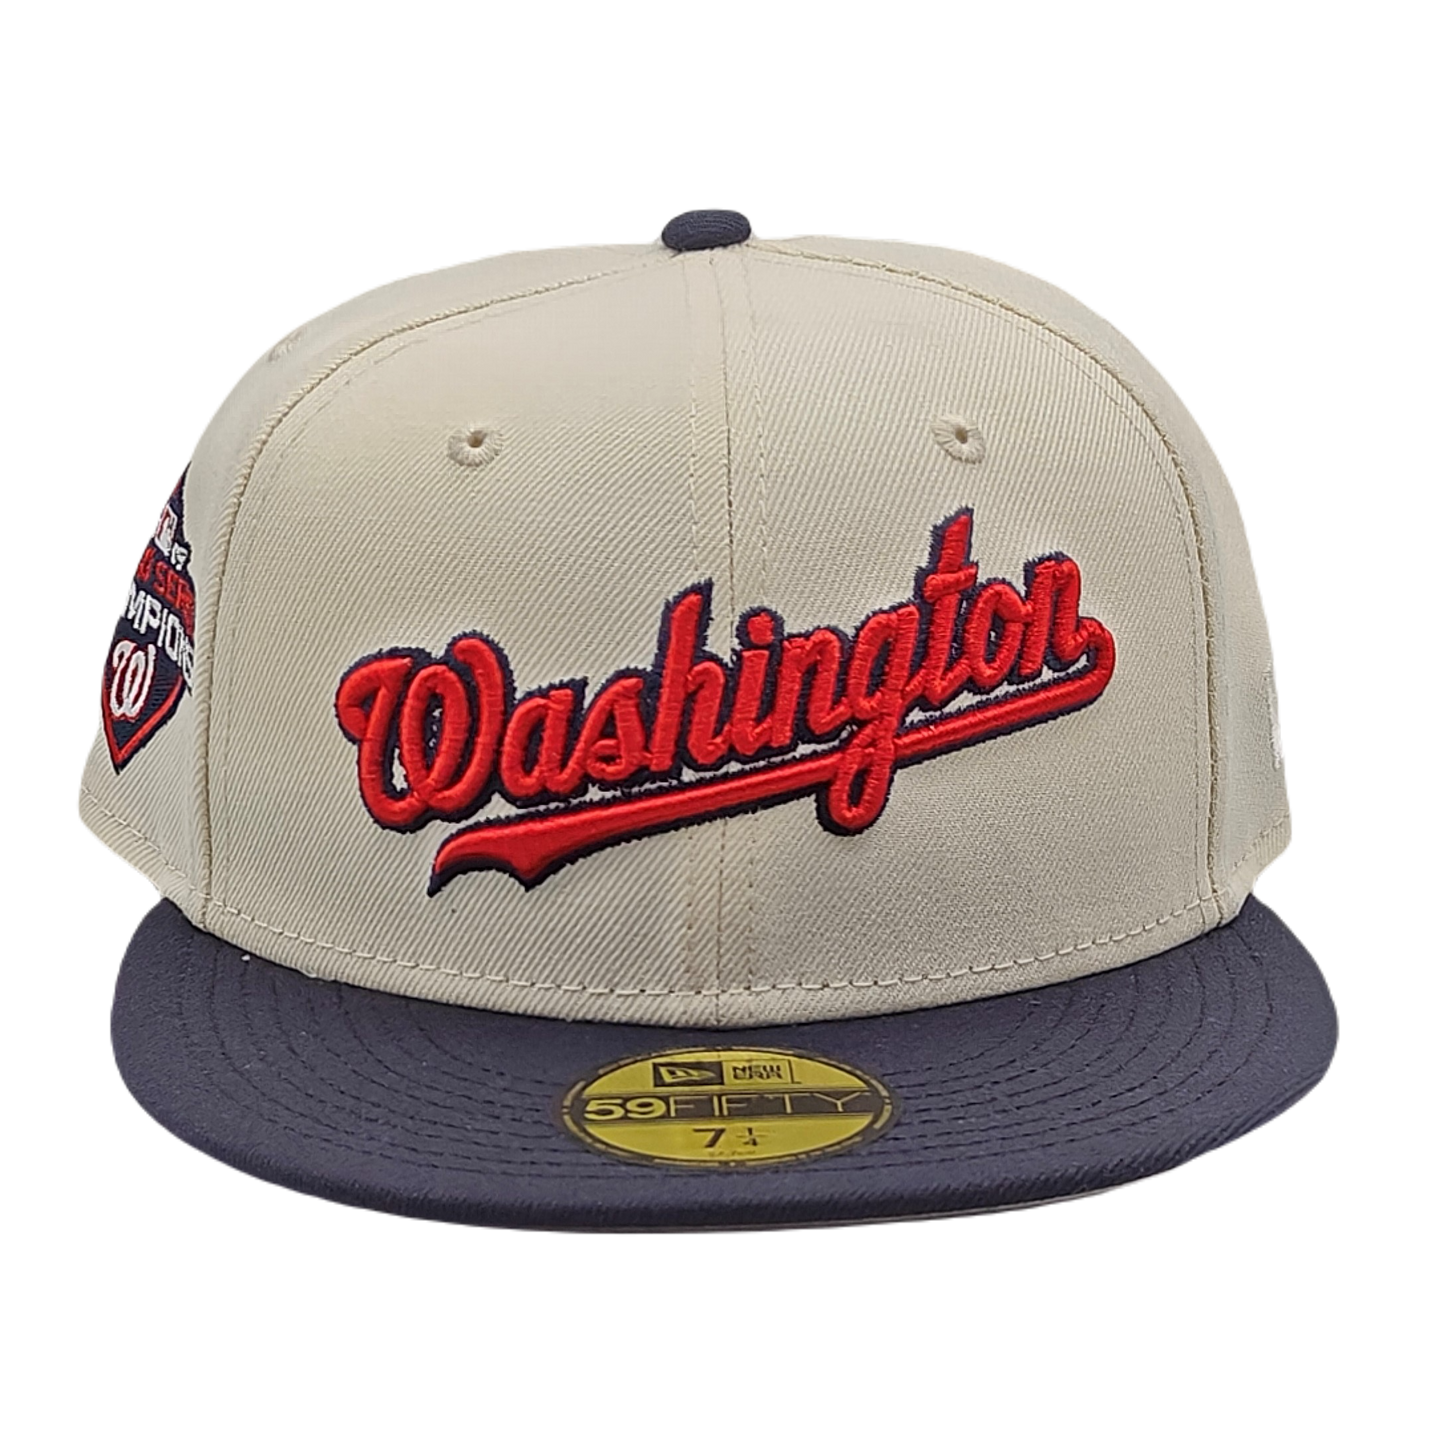 New Era 59Fifty Washington Nationals 2019 World Series Champions Patch Fitted Hat